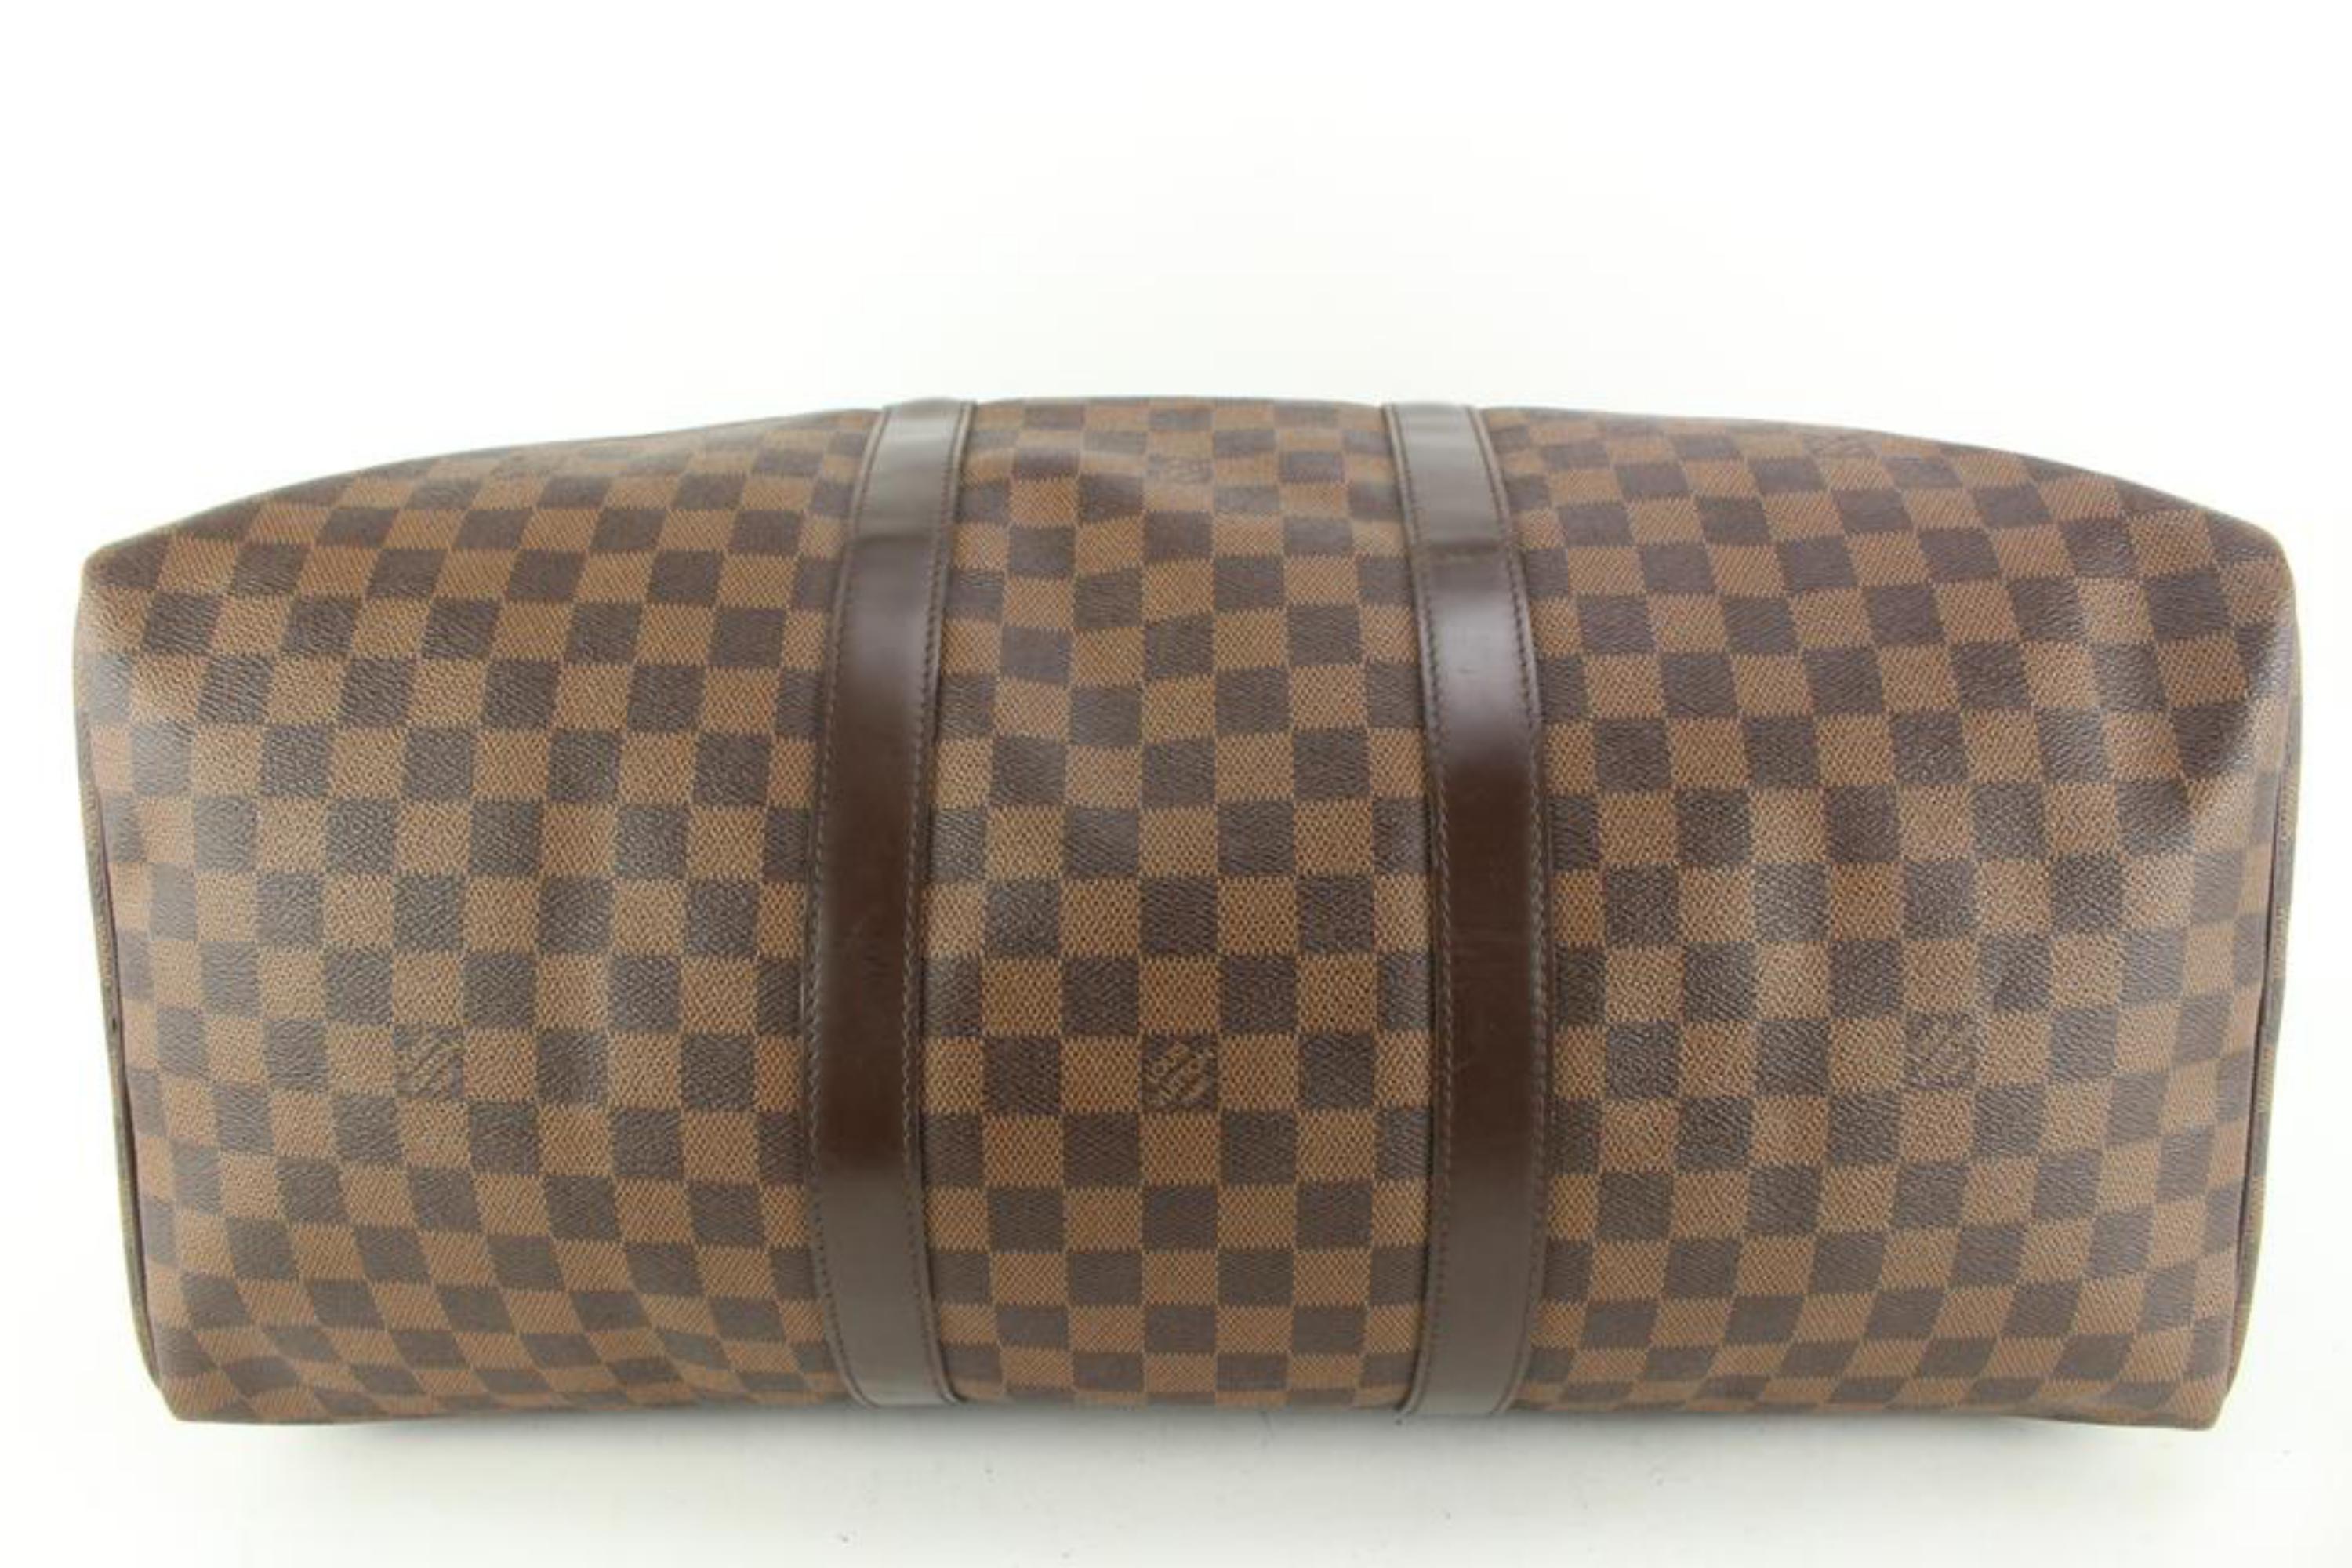 Brown Louis Vuitton Damier Ebene Keepall 50 Duffle Bag Upcycle Ready 54lz429s For Sale